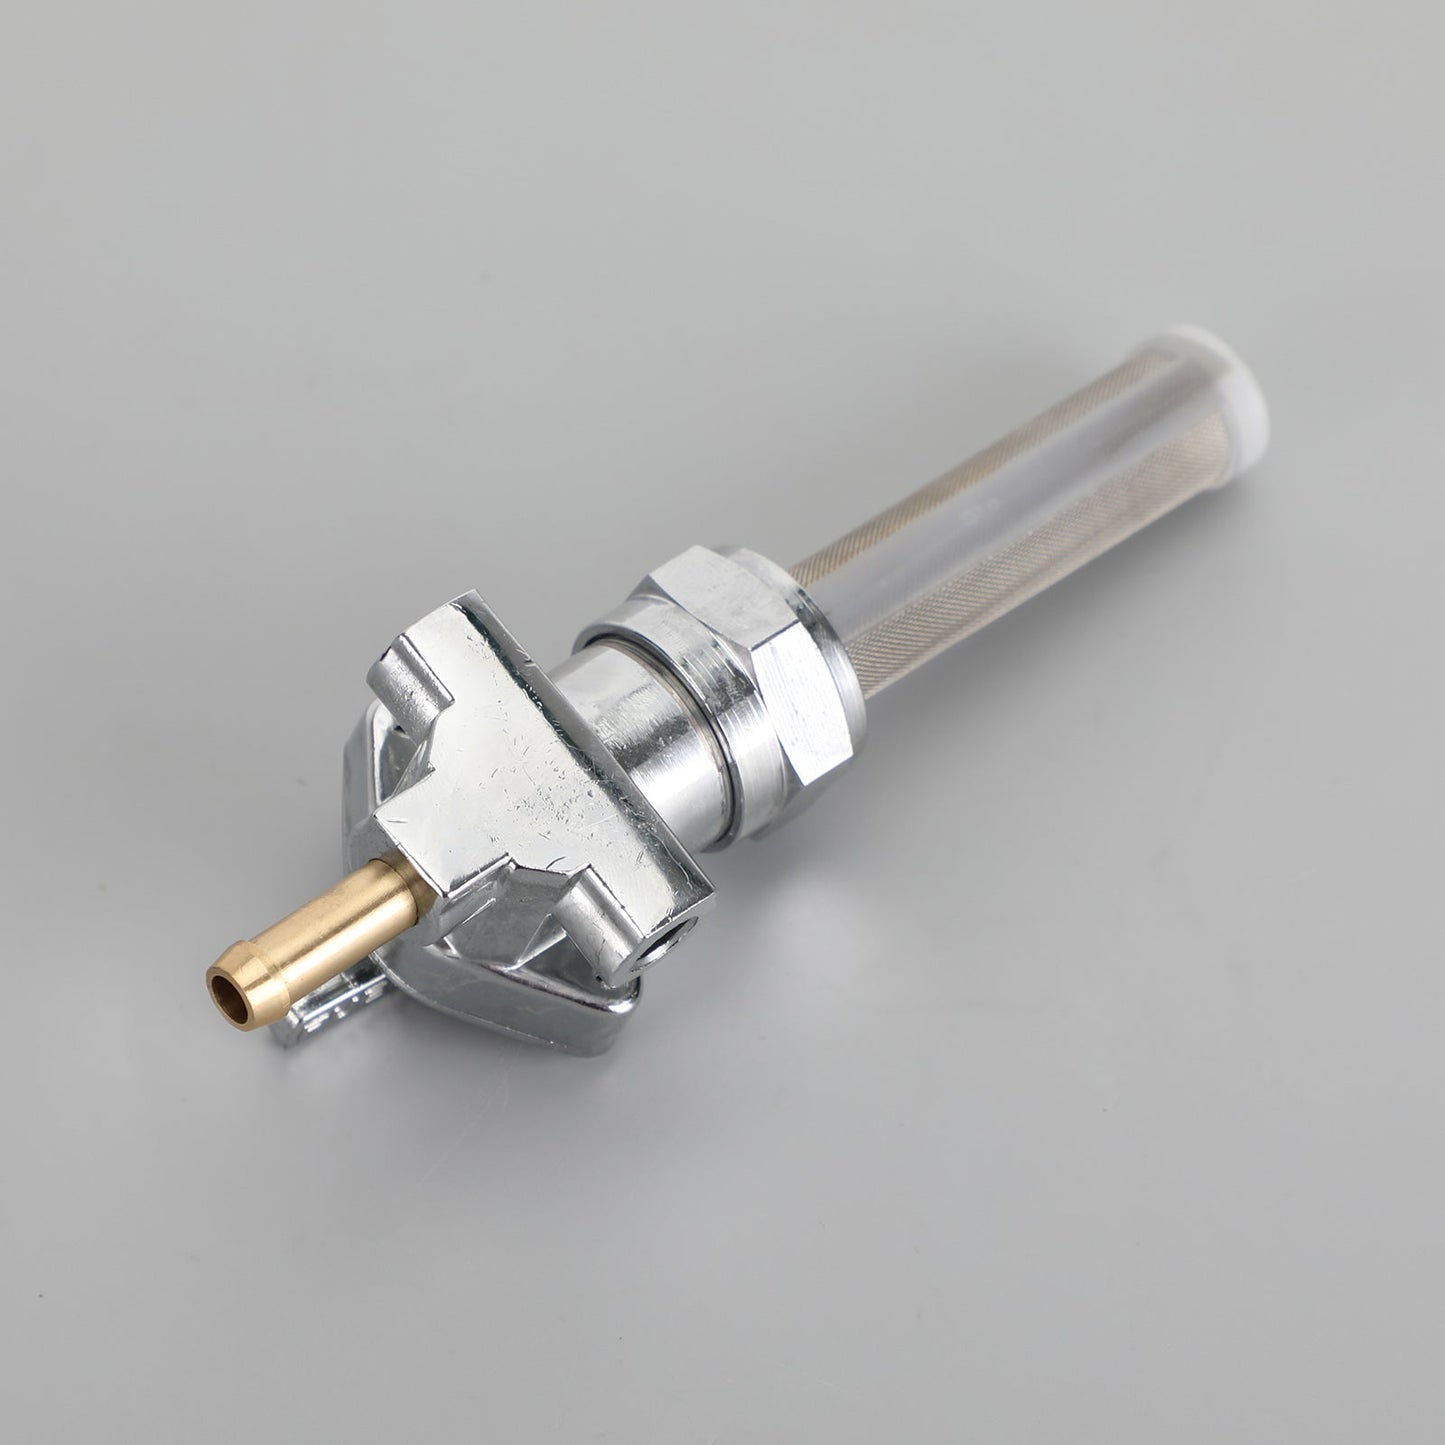 Petcock Fuel Valve Straight Outlet 22mm fit for Dyna Super Glide Electra Glide